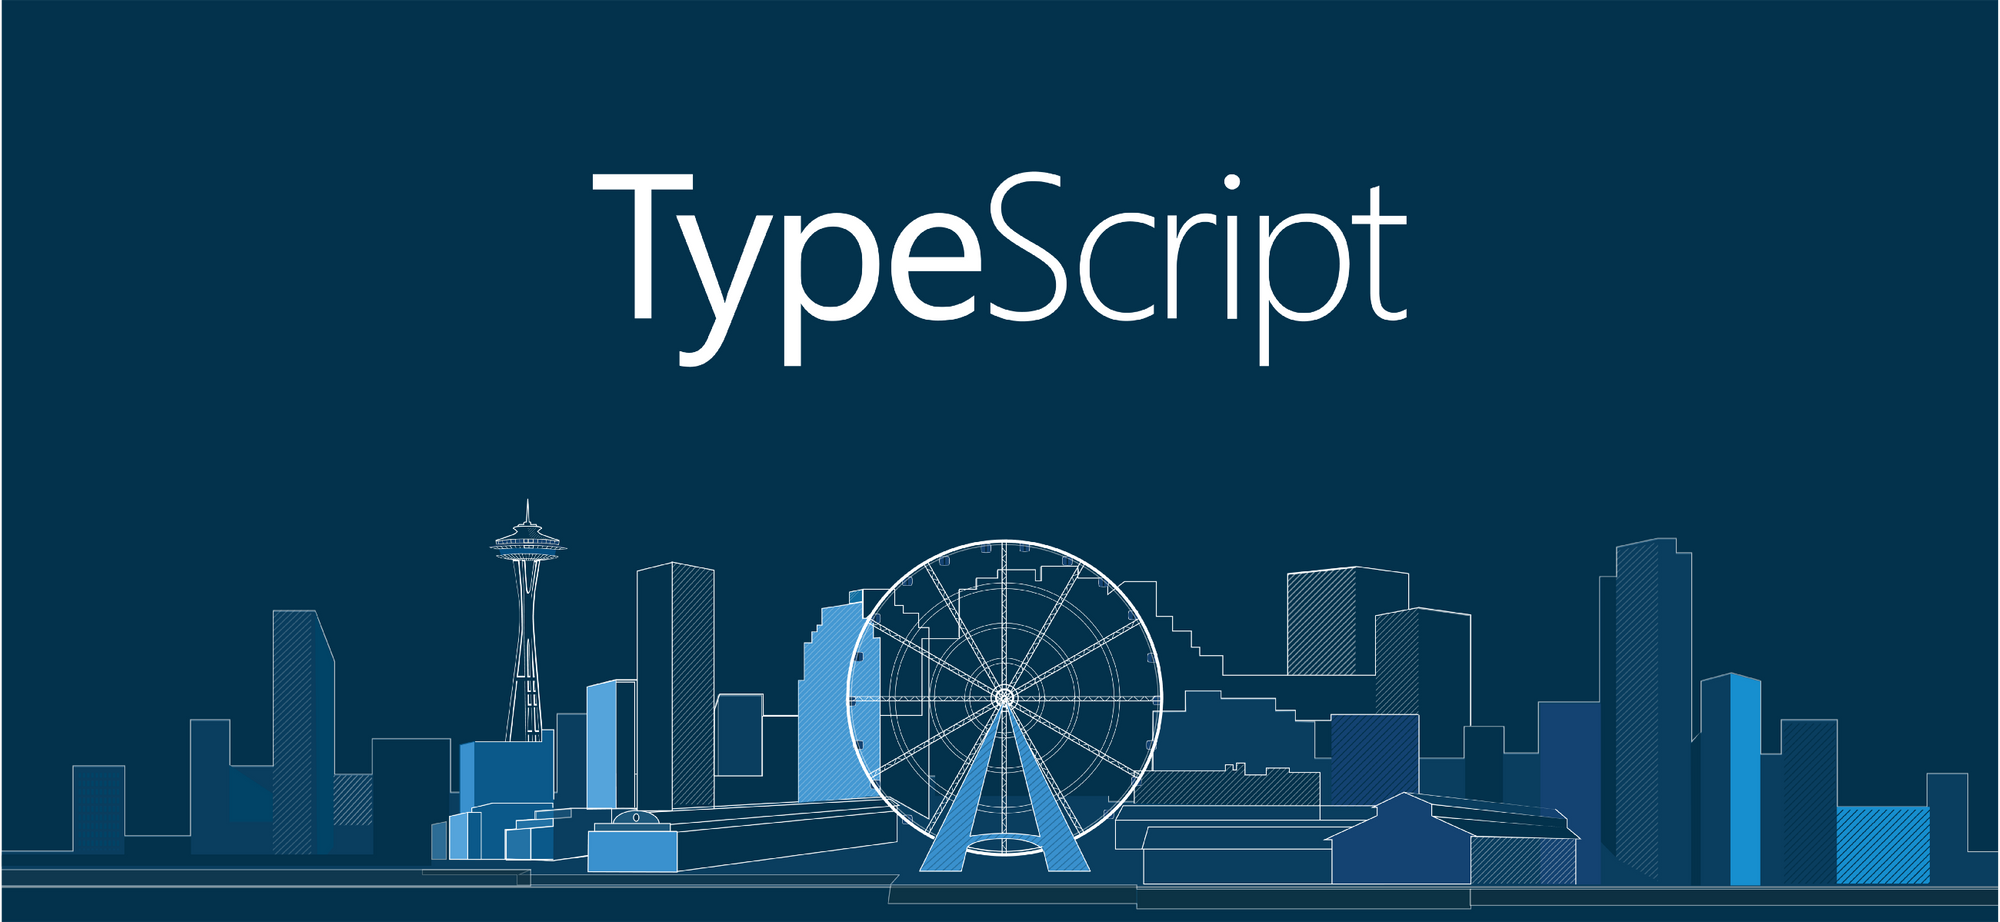 TypeScript: Simple Guide To The TypeScript Interface